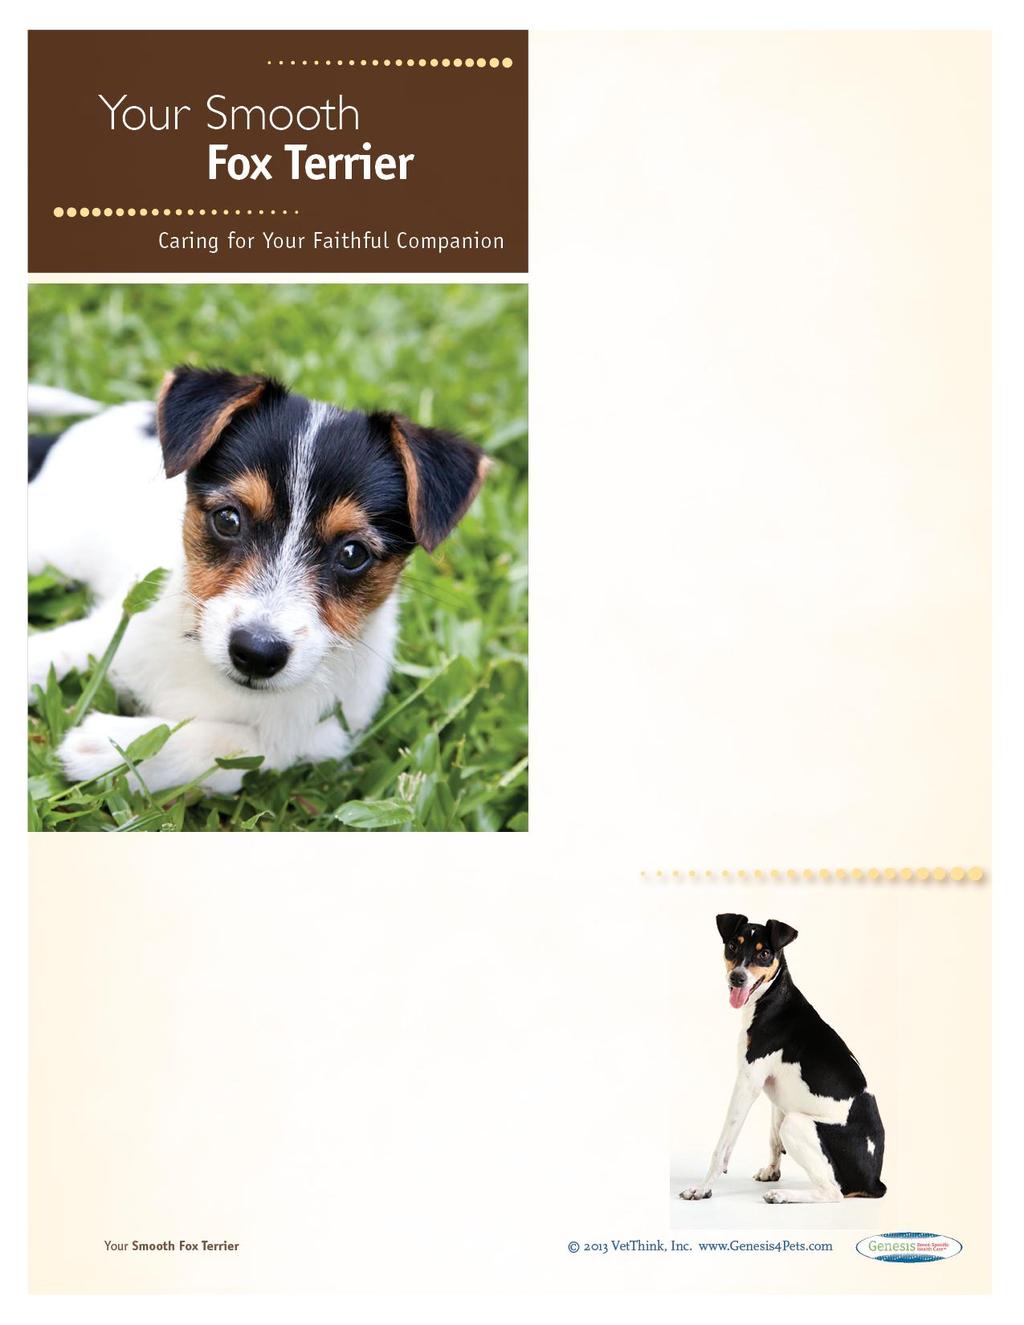 Smooth Fox Terriers: What a Unique Breed! Your dog is special! She's your best friend, companion, and a source of unconditional love.